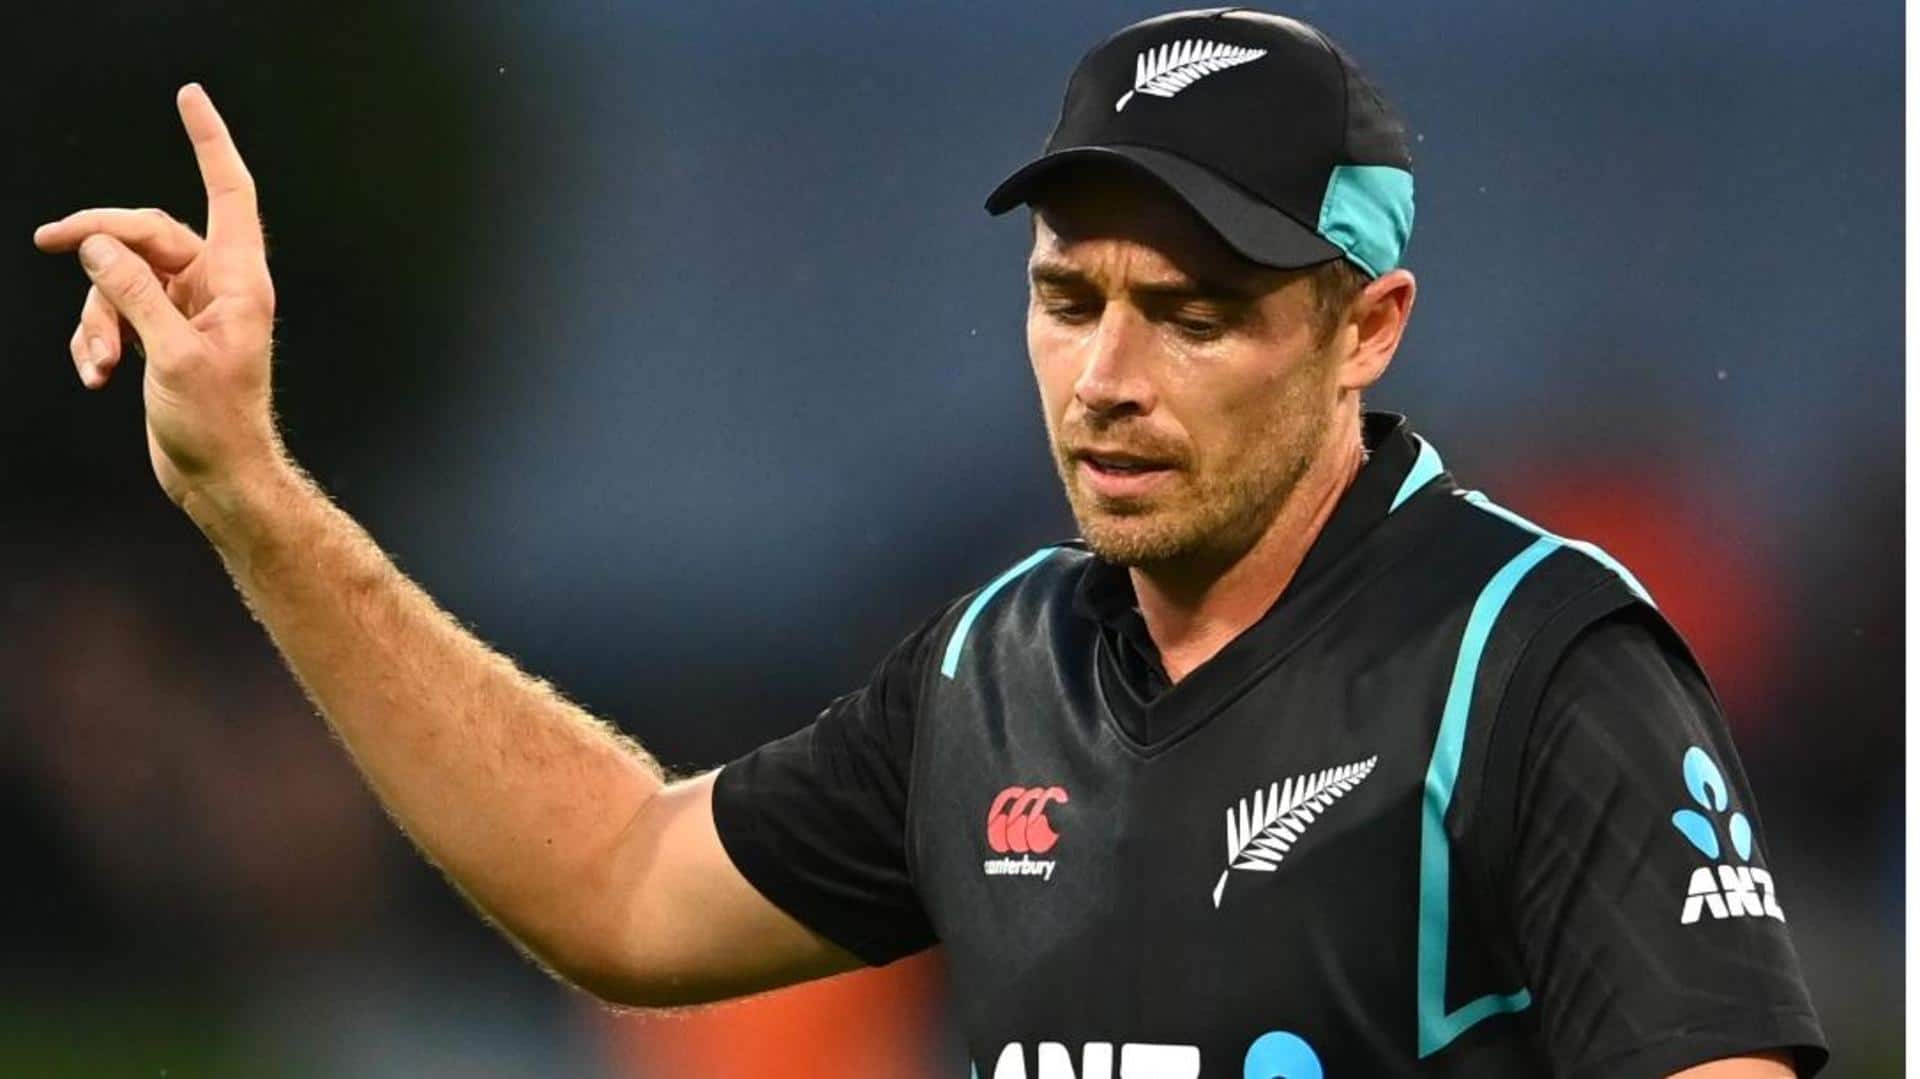 Tim Southee becomes second bowler with two T20I hat-tricks: Stats